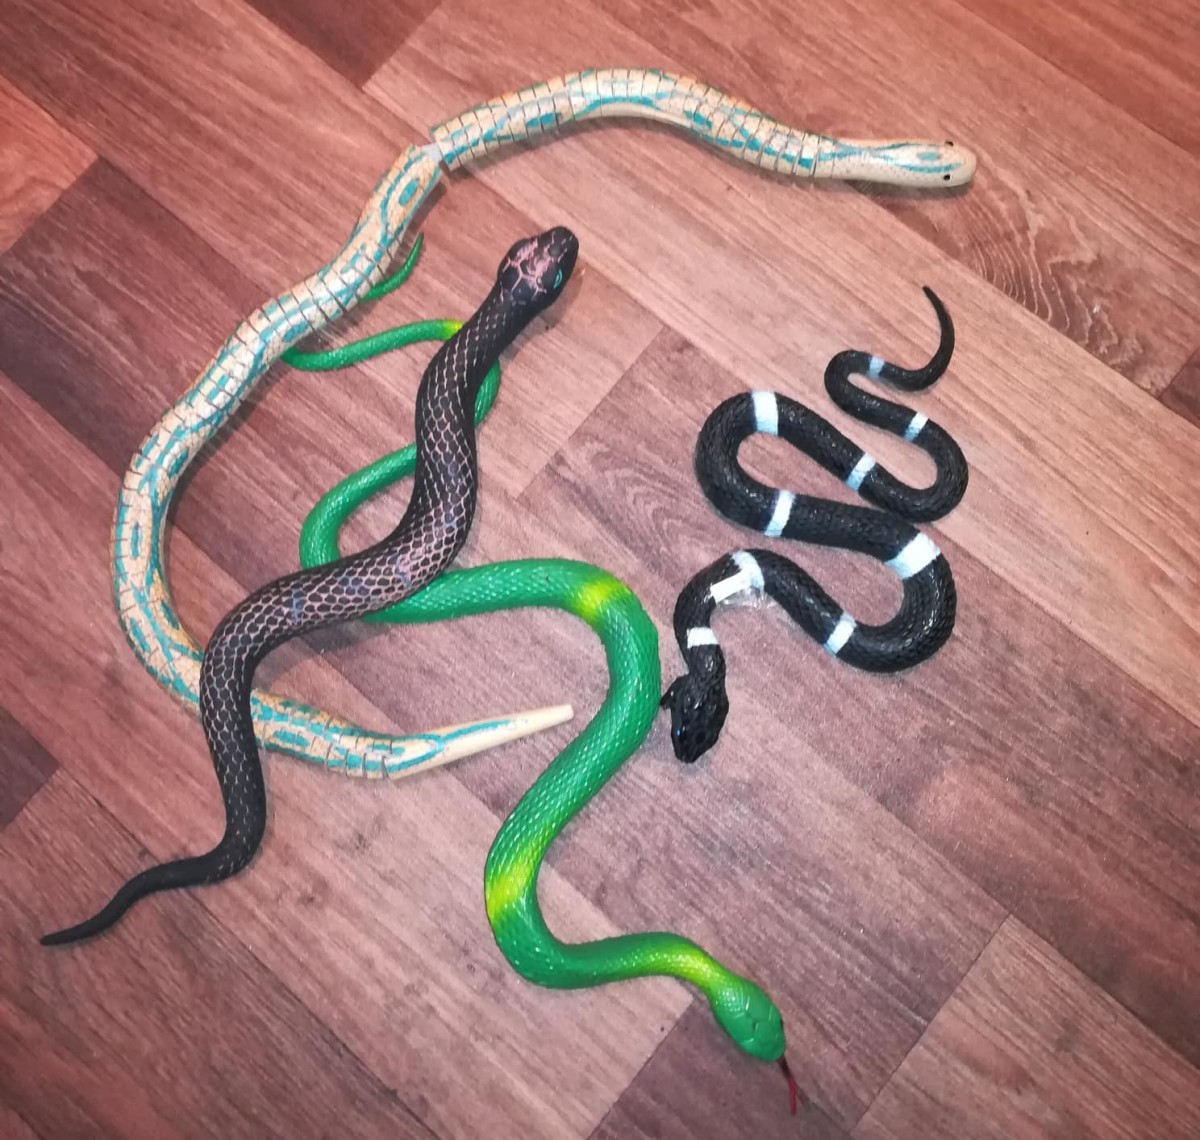 These are the toy snakes I used for my Halloween wreath. 